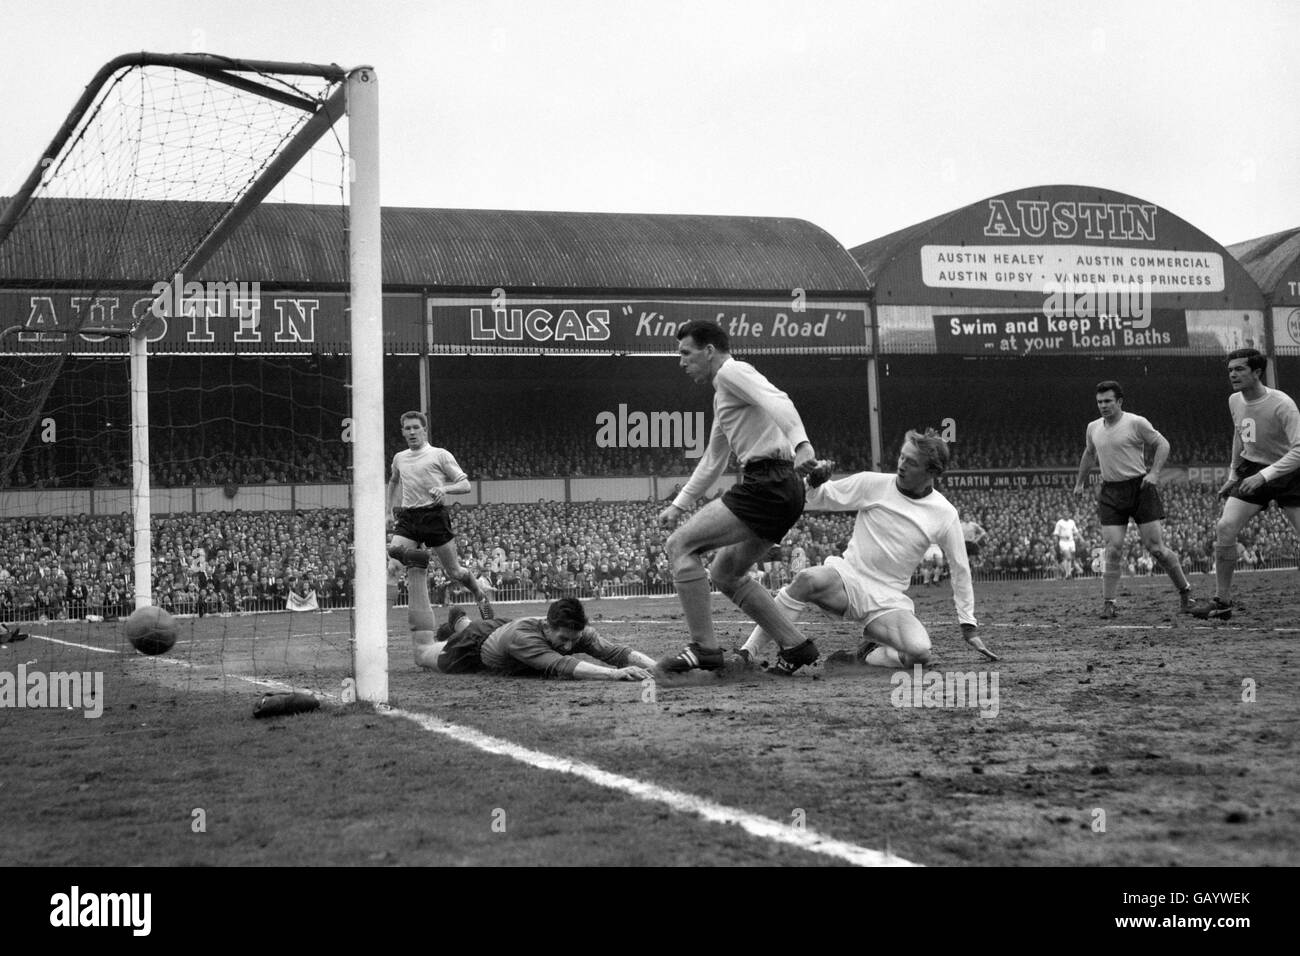 Denis Law, United inside left (right) slides the ball past Southampton goalkeeper Reynolds to score the only goal of th match. The goal put his team in the Wembley final against Leicester. Stock Photo